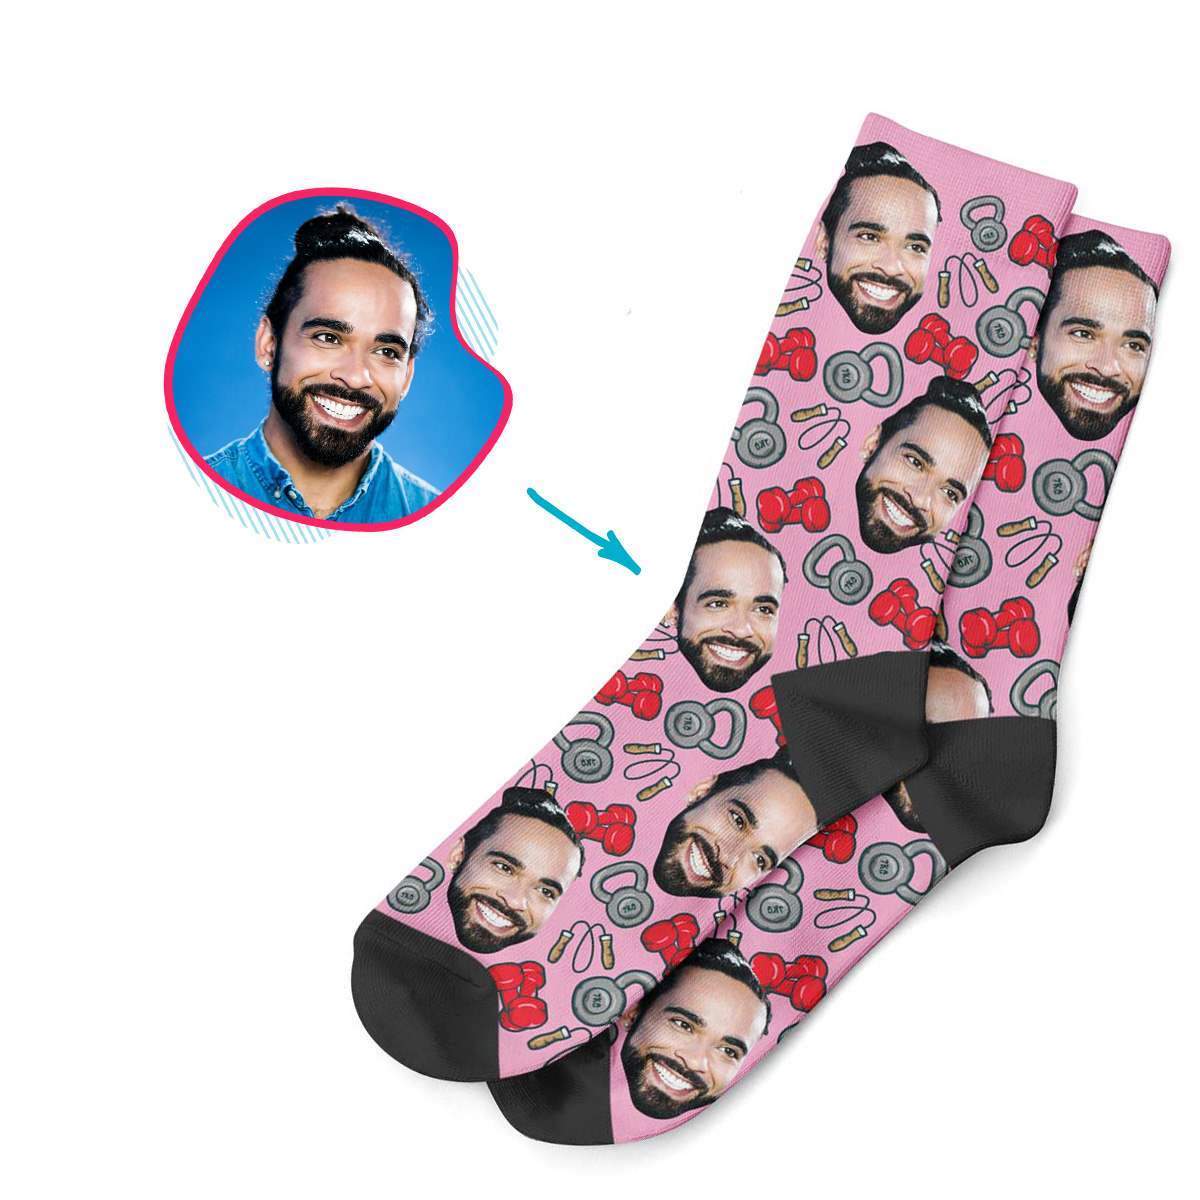 pink Gym & Fitness socks personalized with photo of face printed on them